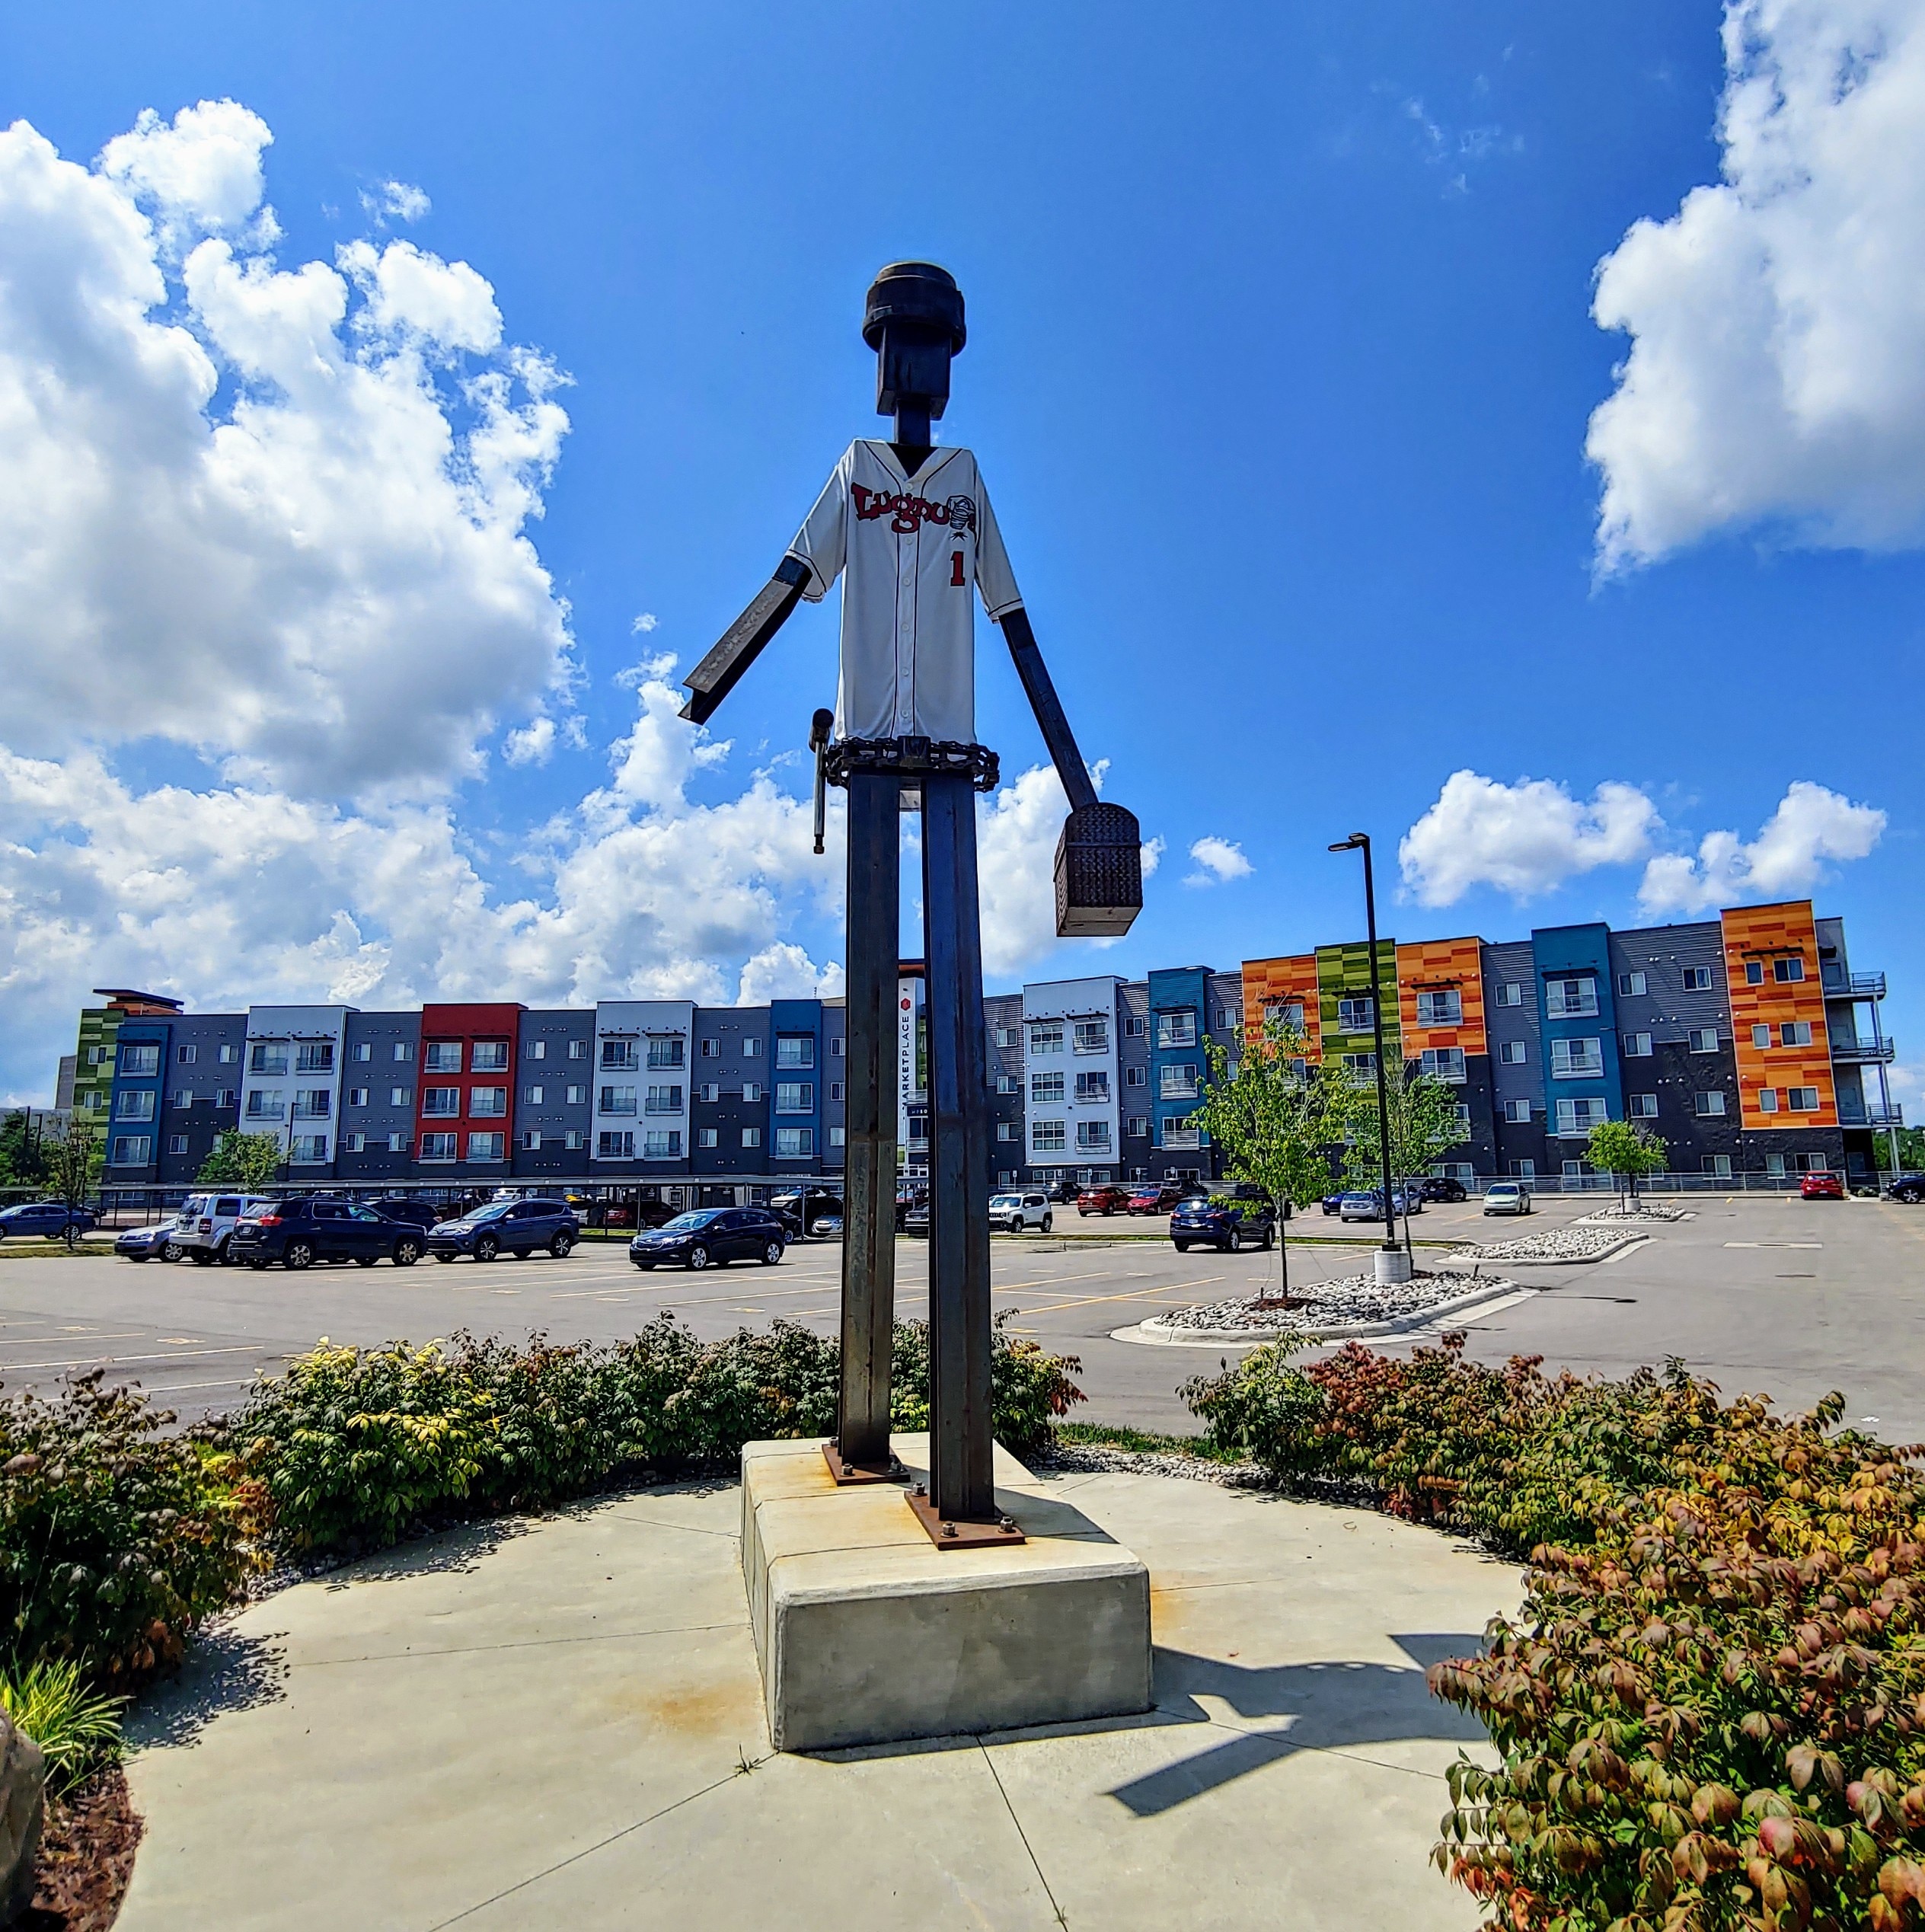 The structural steel statue “The Worker” can be found at Cedar and Shiawassee streets in Lansing. 

The 22-foot-tall, 2,000-pound sculpture created by Rick Luke, is currently sporting a Lansing Lugnuts minor league baseball jersey.

@TheWorker517